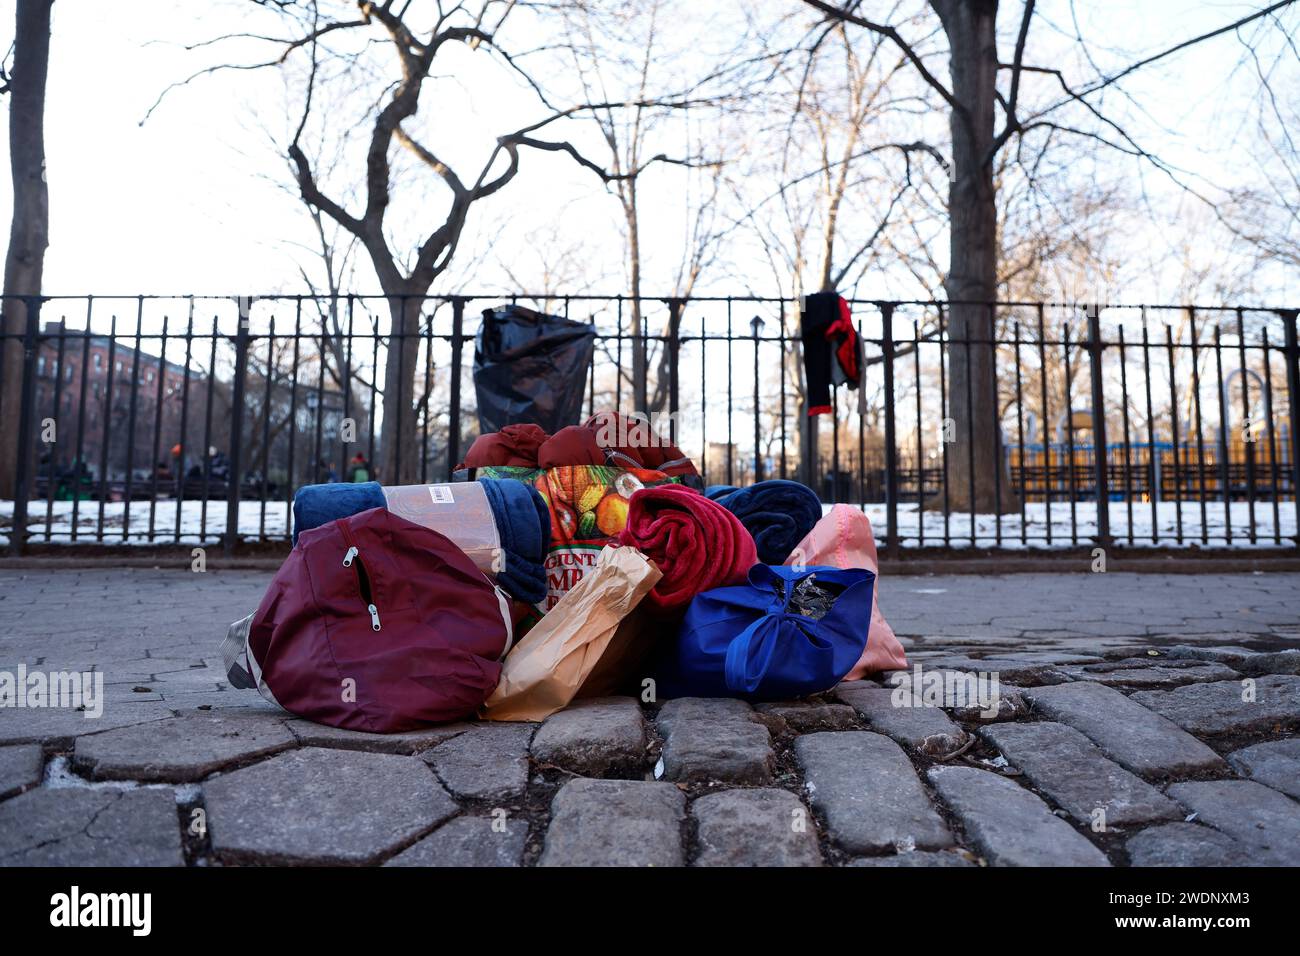 A migrants possessions who has been forced out of shelters lie on the sidewalk as he awaits to be redirected to other shelters in Tompkins Square on the East Side of Manhattan on January, 21, 2024 in New York City. New York City imposed a new directive effectively displacing single adult migrants from shelters forcing them to reapply for new lodging after an initial period of 30 days. Several volunteer groups have been providing hot meals and warm clothing in the interim during the increasingly cold temperatures. (Photo by John Lamparski/SIPA USA). Stock Photo